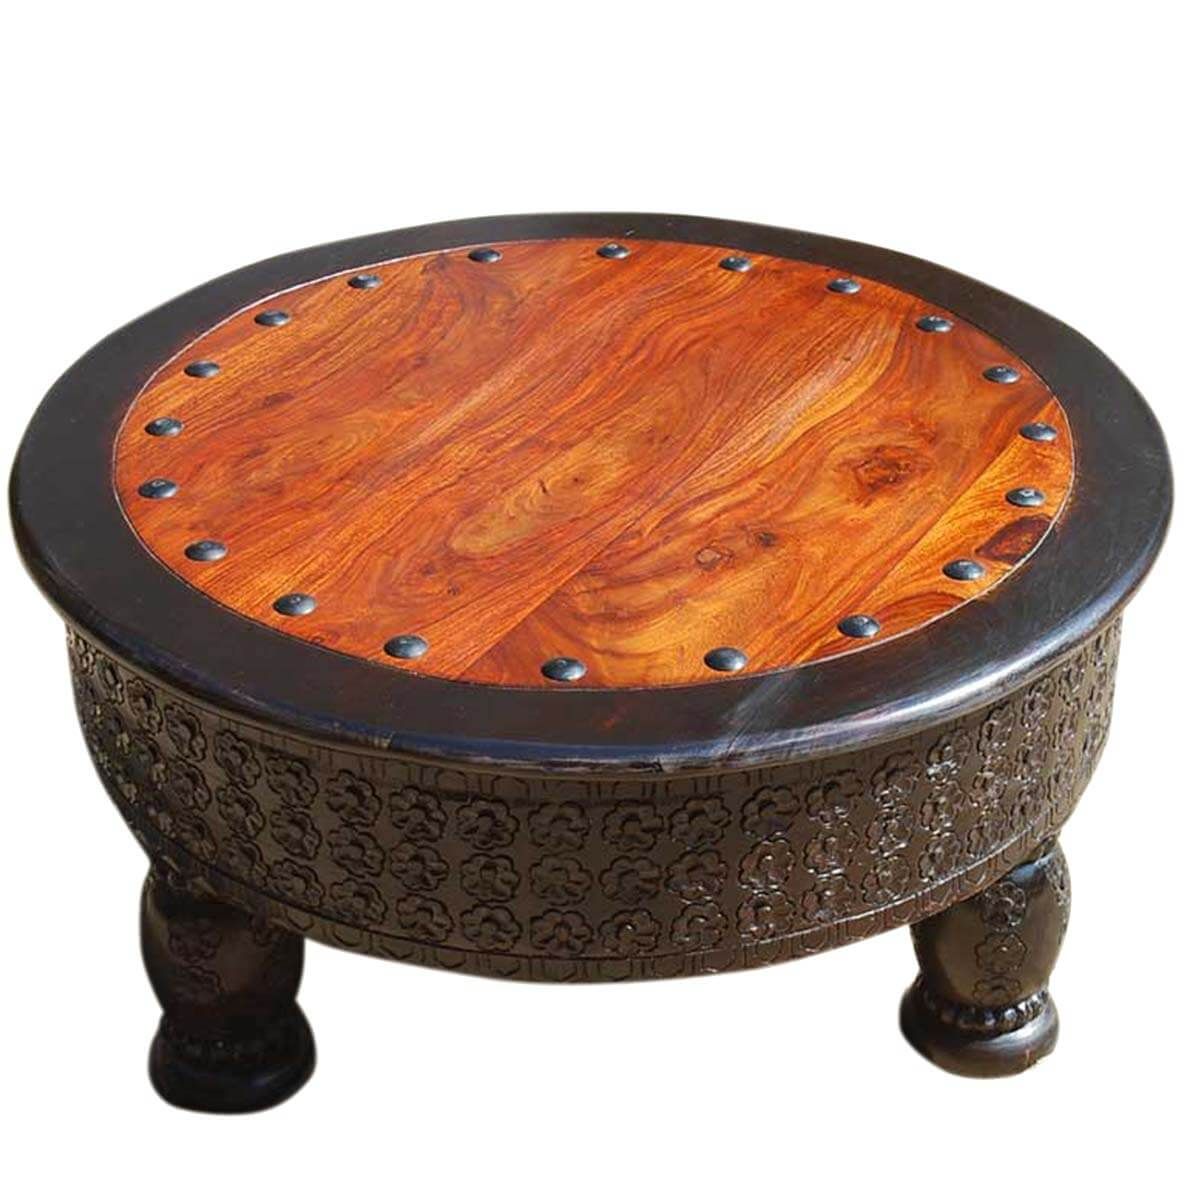 Nogales Rustic Solid Wood Hand Carved Round Coffee Table Inside Wooden Hand Carved Coffee Tables (View 10 of 20)